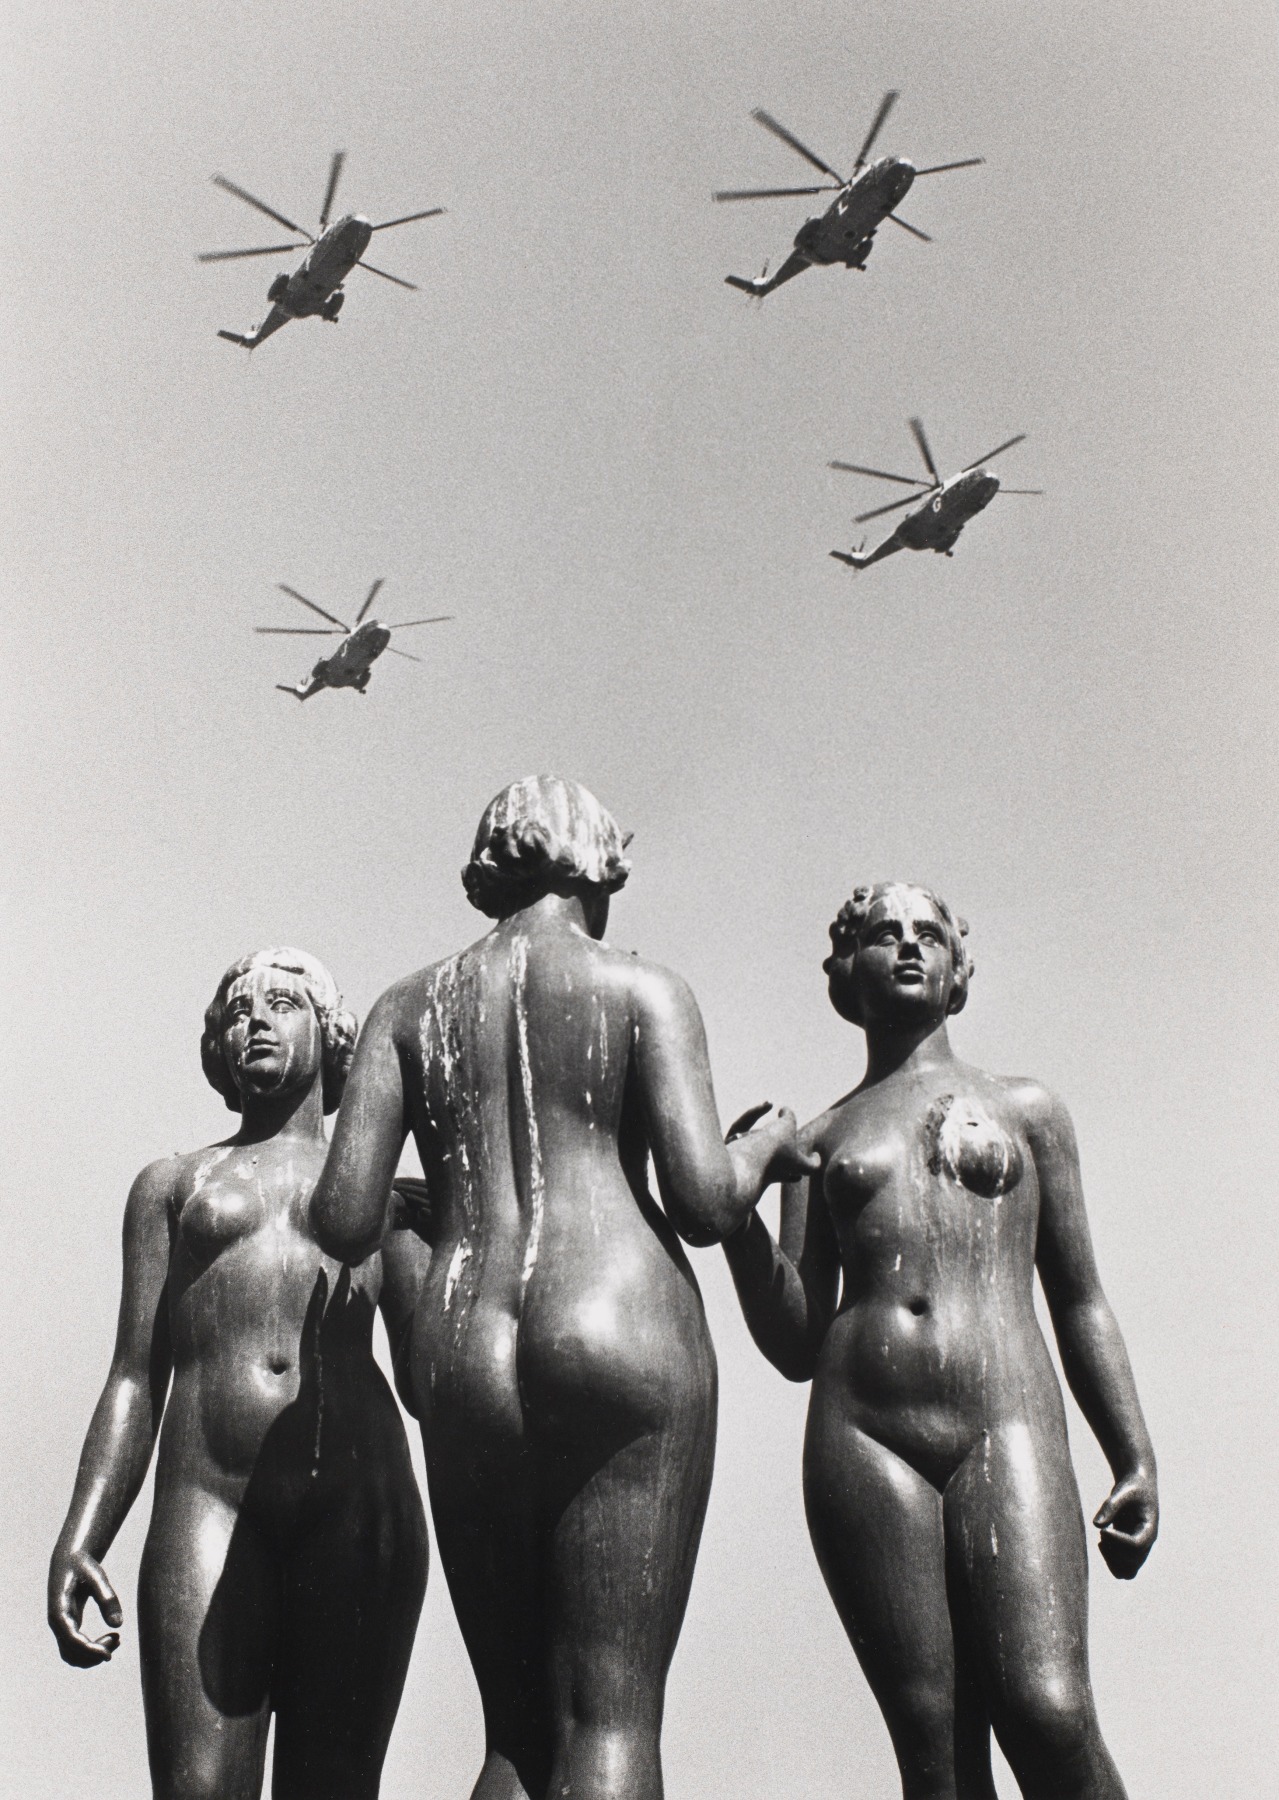 Robert Doisneau (1912-1994)  Helicopters, 1972, printed 1984  Gelatin silver print  16 x 12 inches (paper), black and white photography